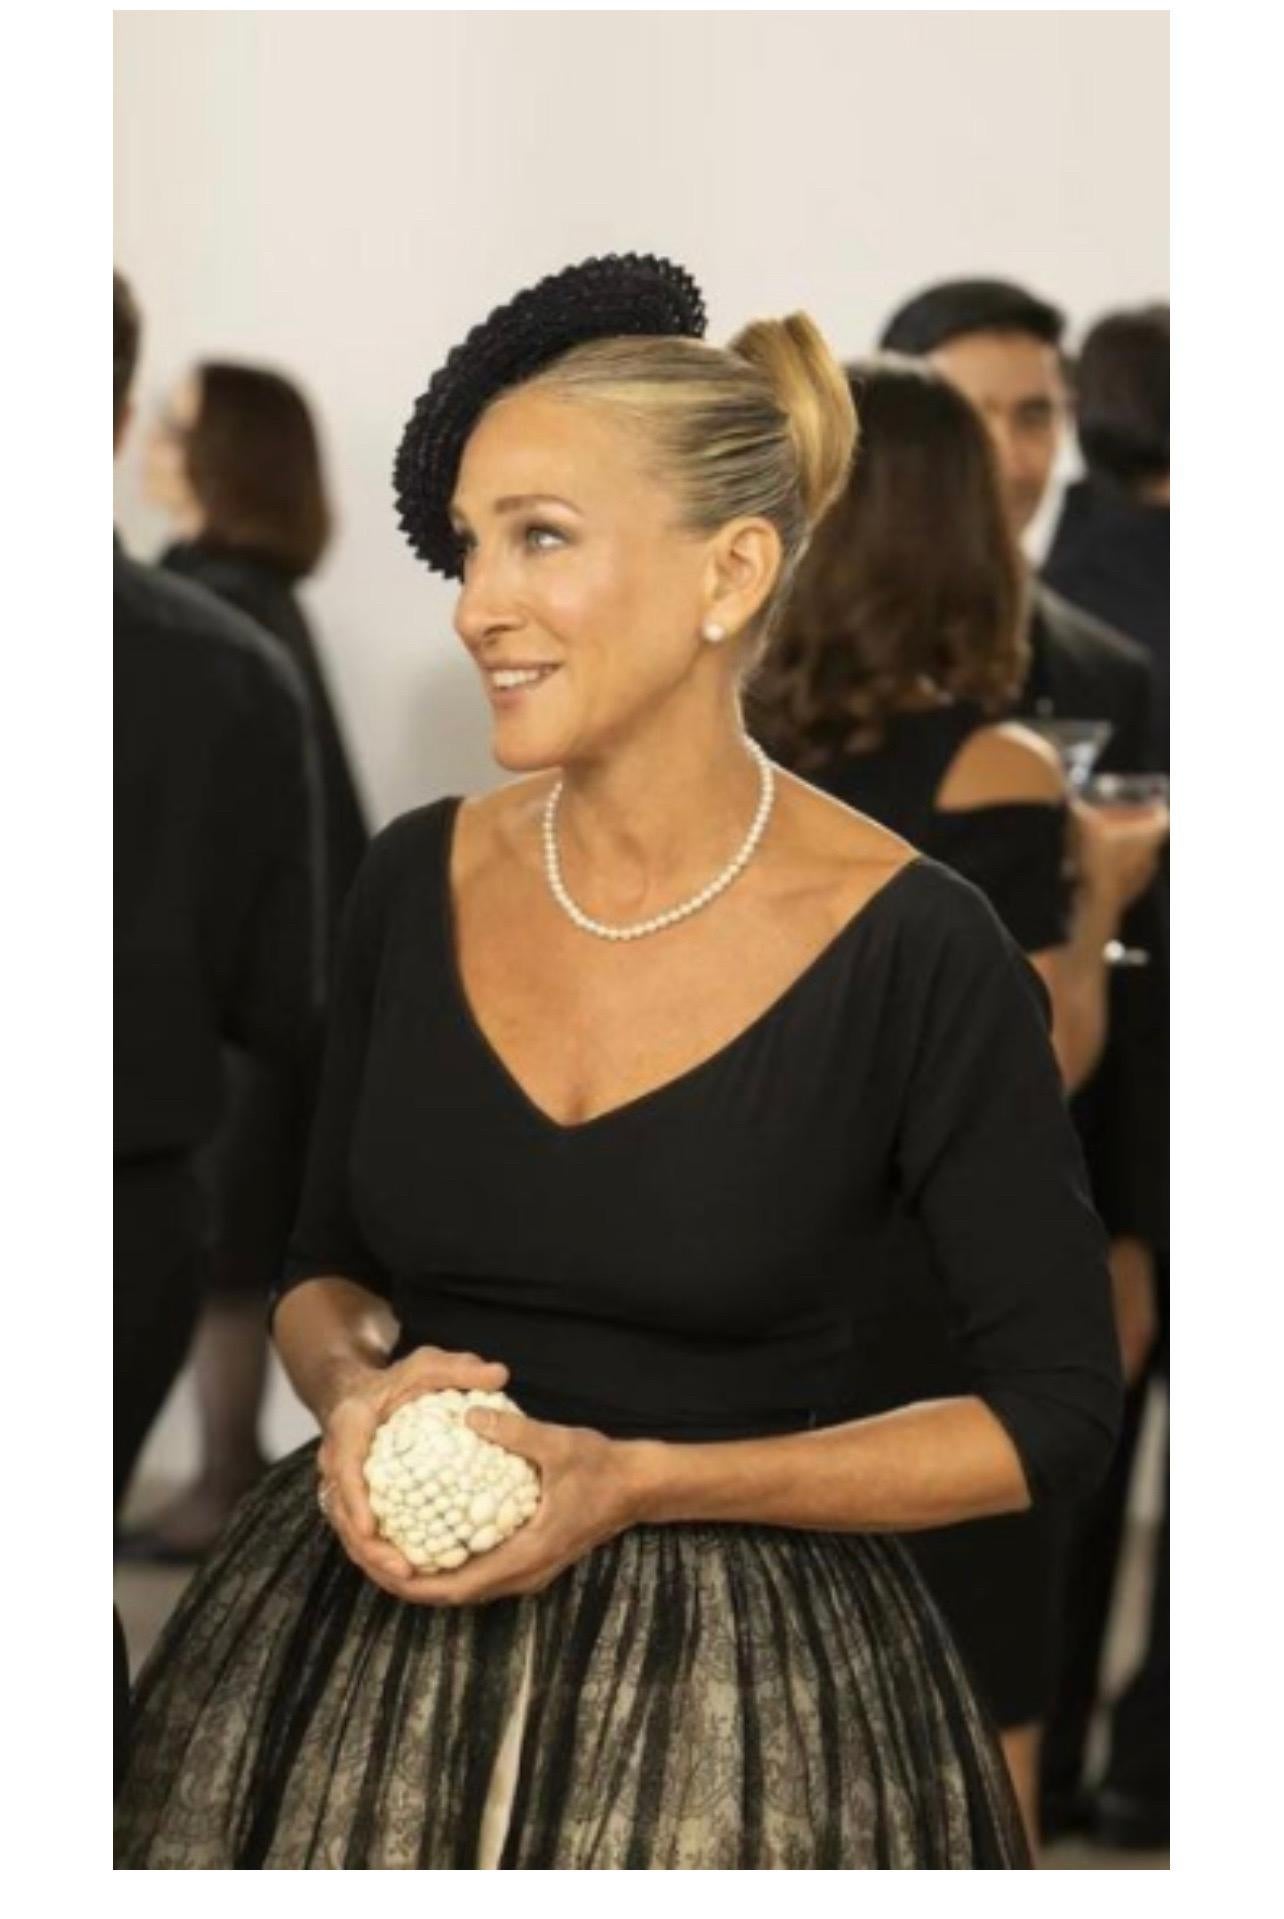 Chic 90s GLORIA ASTOLFO faux pearl white cuff bracelet ! Sarah Jessica Parker wore a faux pearl clutch in the “Just Like That’ SATCHEL revival. Can easily be dressed up or down. Pair with jeans, or pair with a dress or gown.
One size fits most, with